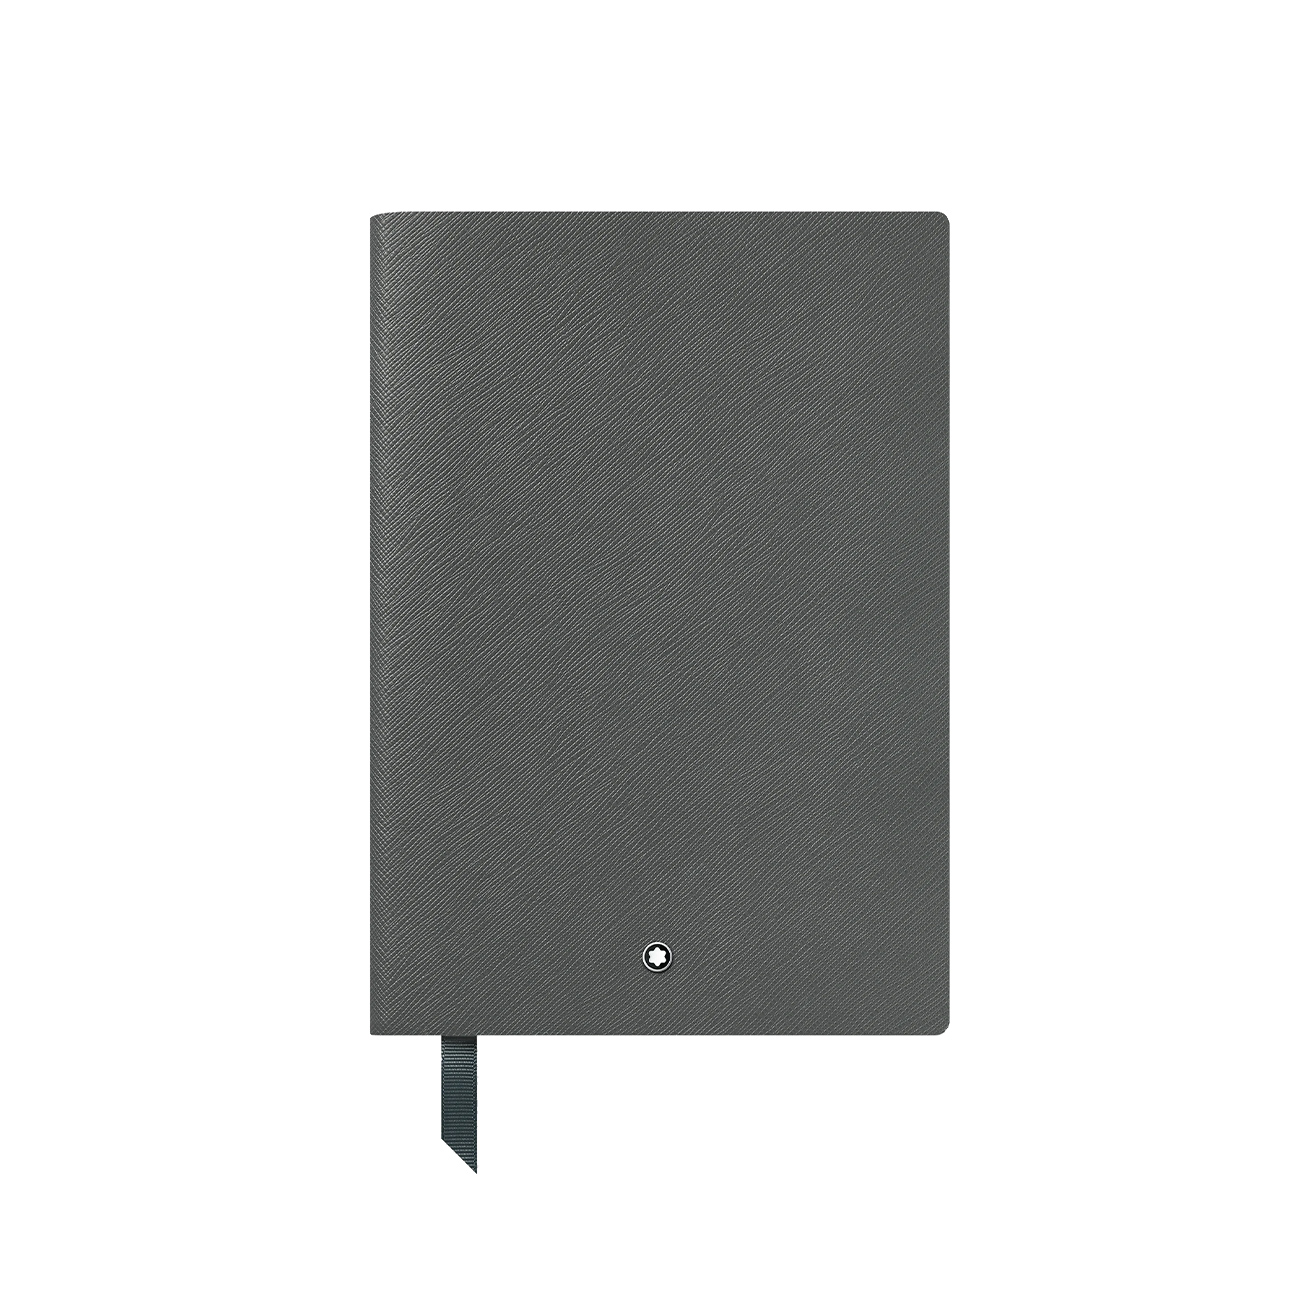 Montblanc Fine Stationery Notebook #146 Cool Grey